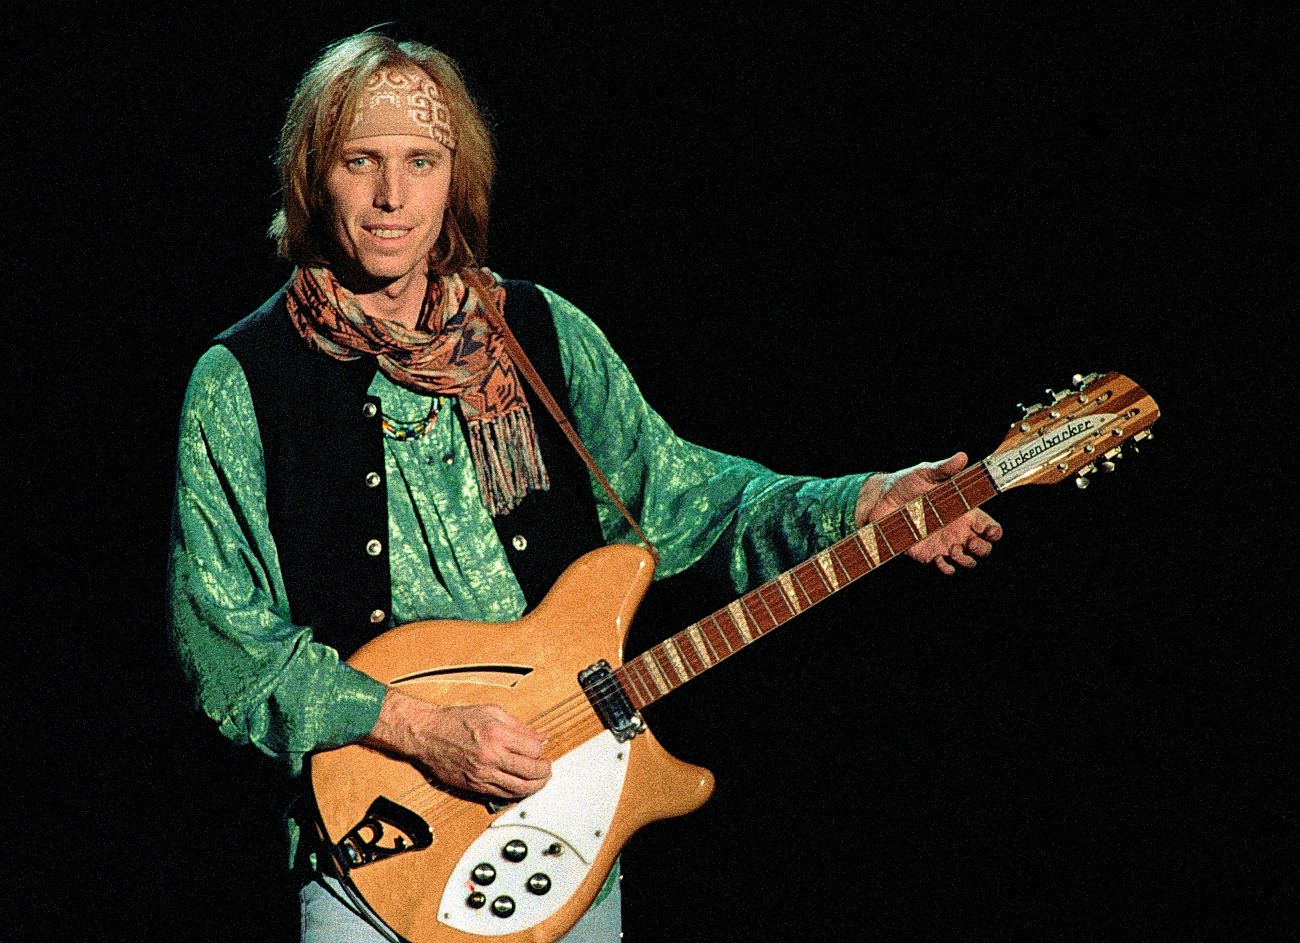 Tom Petty wears a green shirt and strums a guitar.